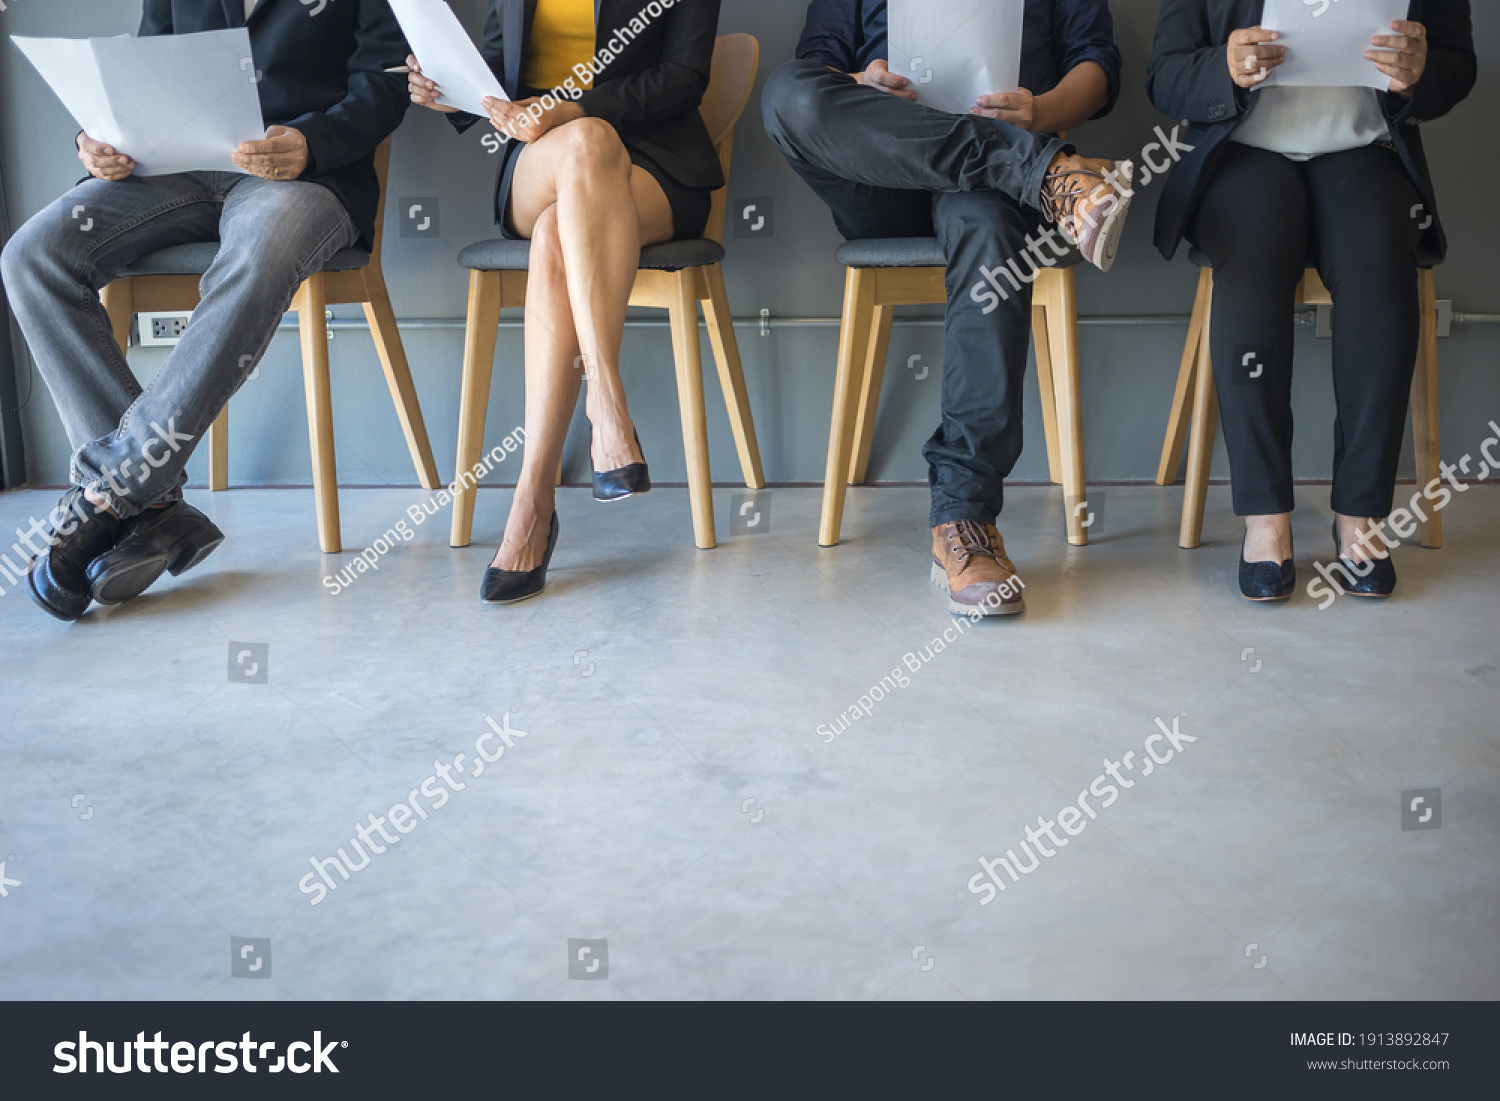 Group of peoples are sitting to review the documents while waiting for a job interview. #1913892847